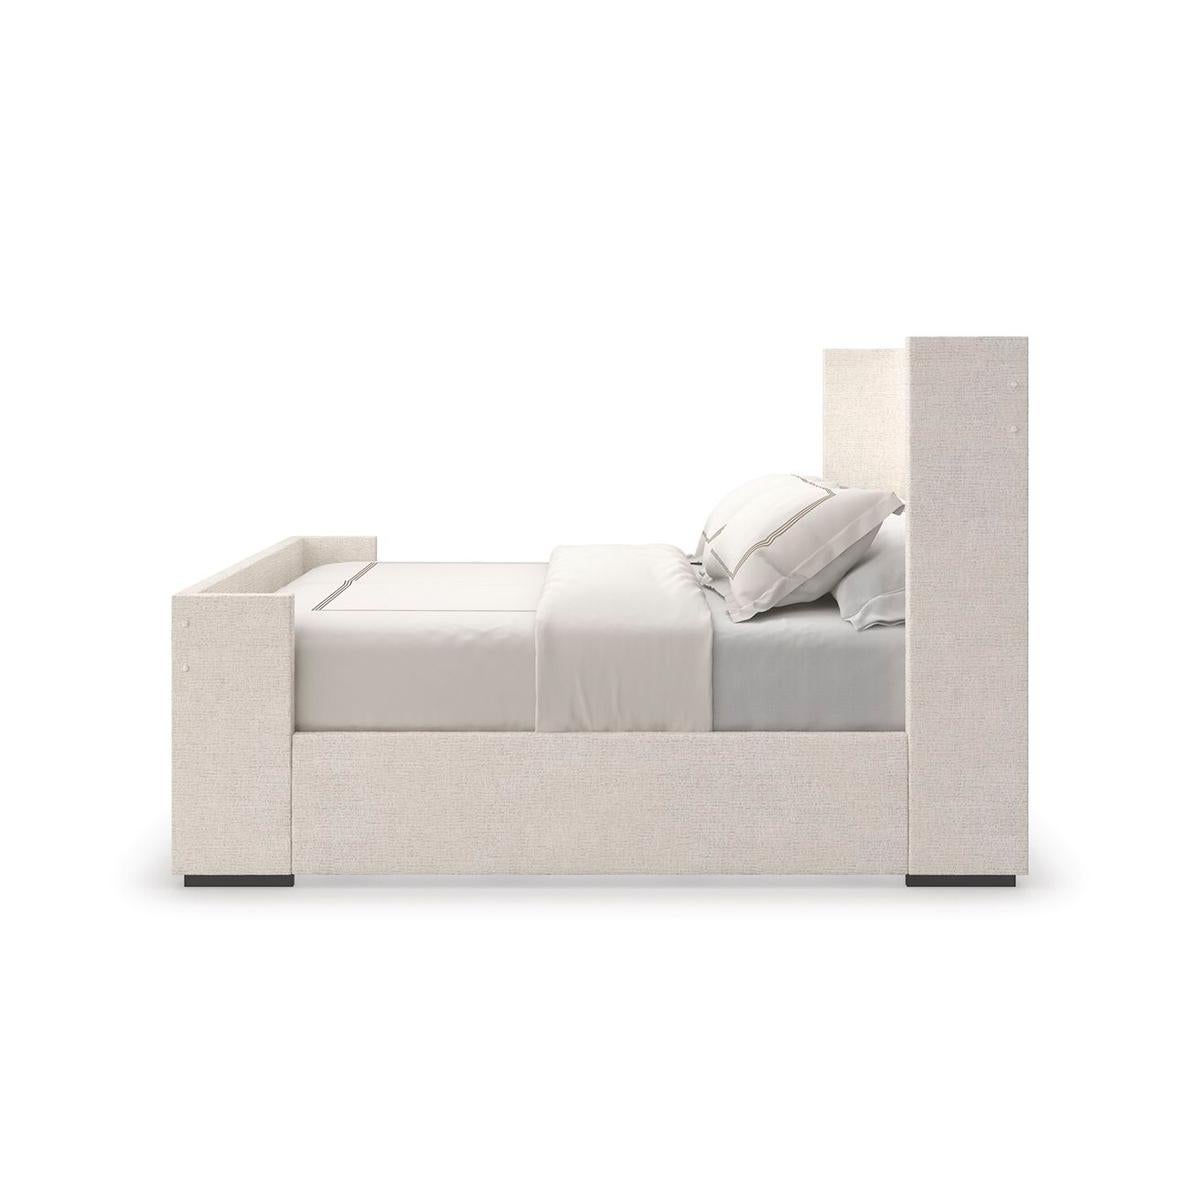 Asian Upholstered Queen Size Minimalist Bed For Sale